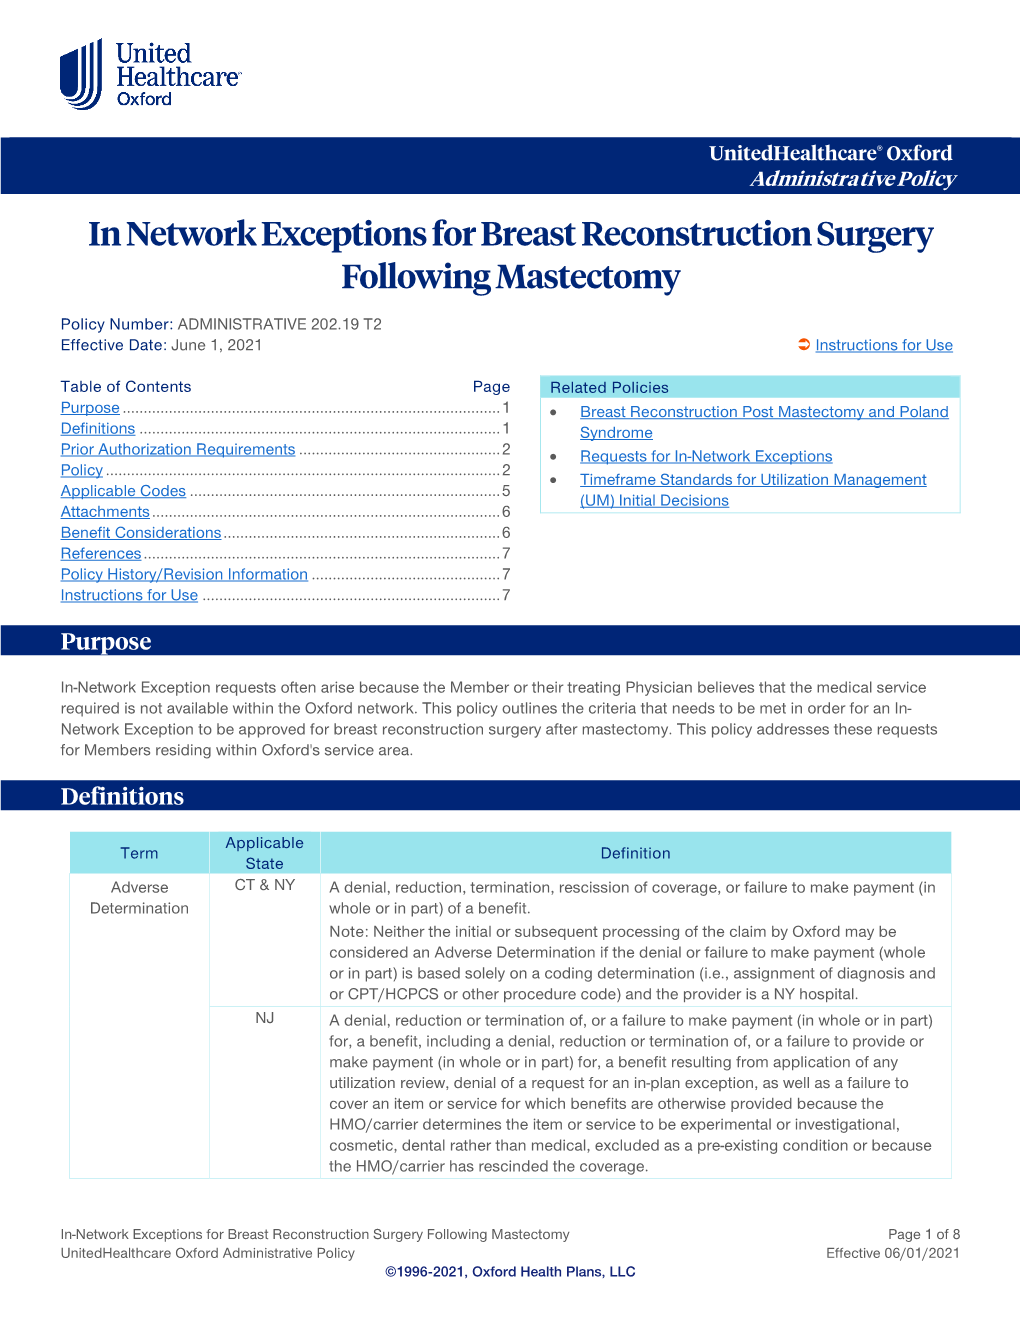 In-Network Exceptions for Breast Reconstruction Surgery Following